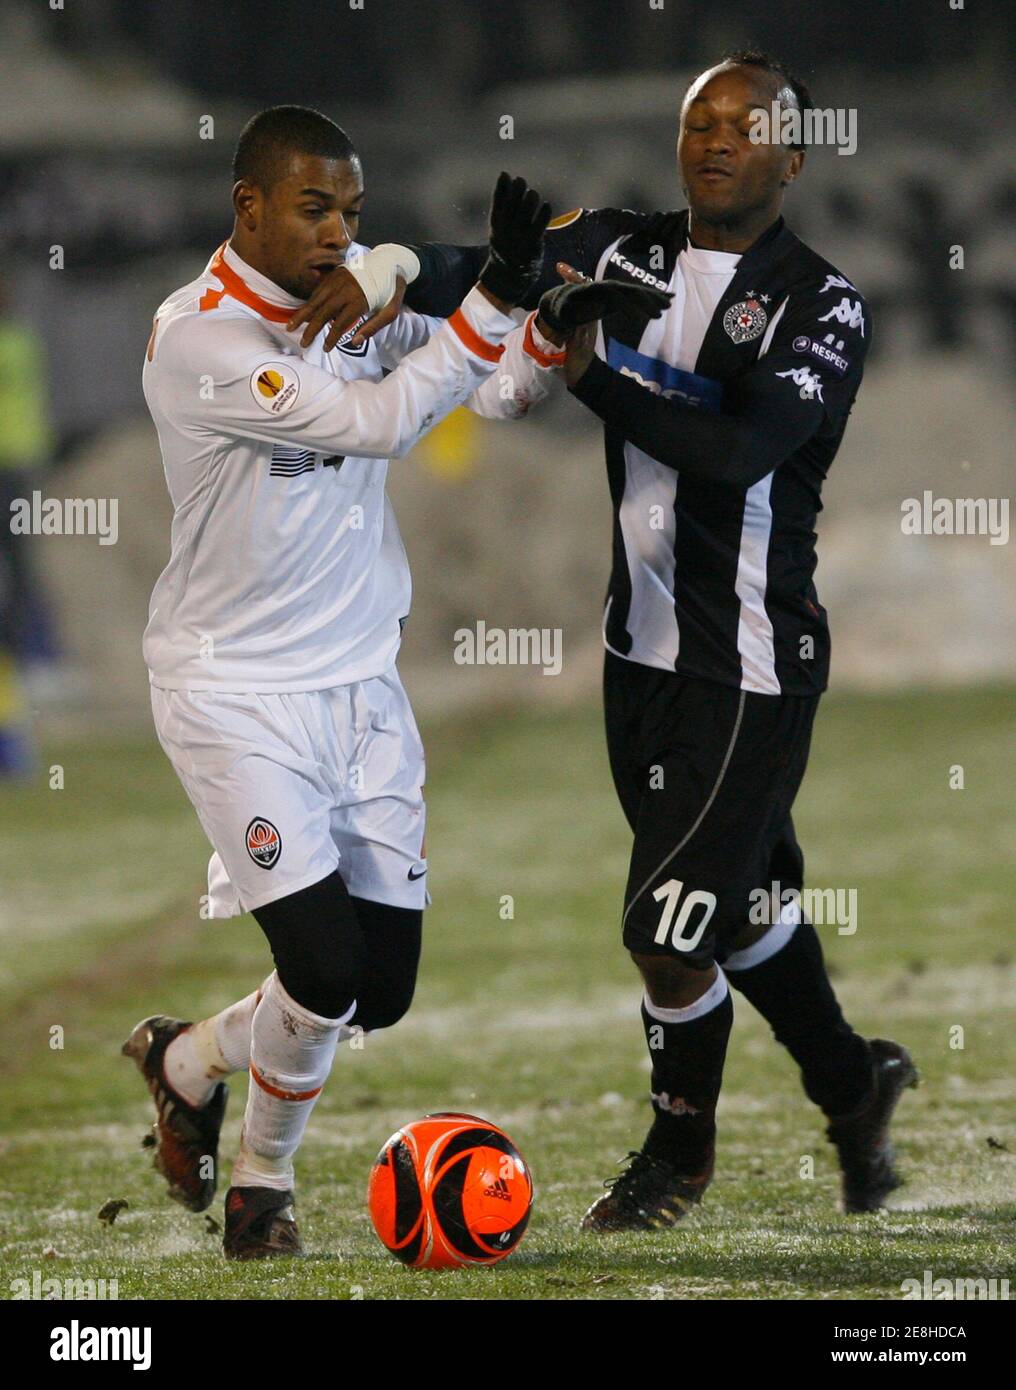 Partizan Belgrade's Almani Moreira (R) fights for the ball with Shakhtar Donetsk's Fernandinho during their Europa League soccer match in Belgrade December 16, 2009. REUTERS/Ivan Milutinovic (SERBIA - Tags: SPORT SOCCER IMAGES OF THE DAY) Stock Photo